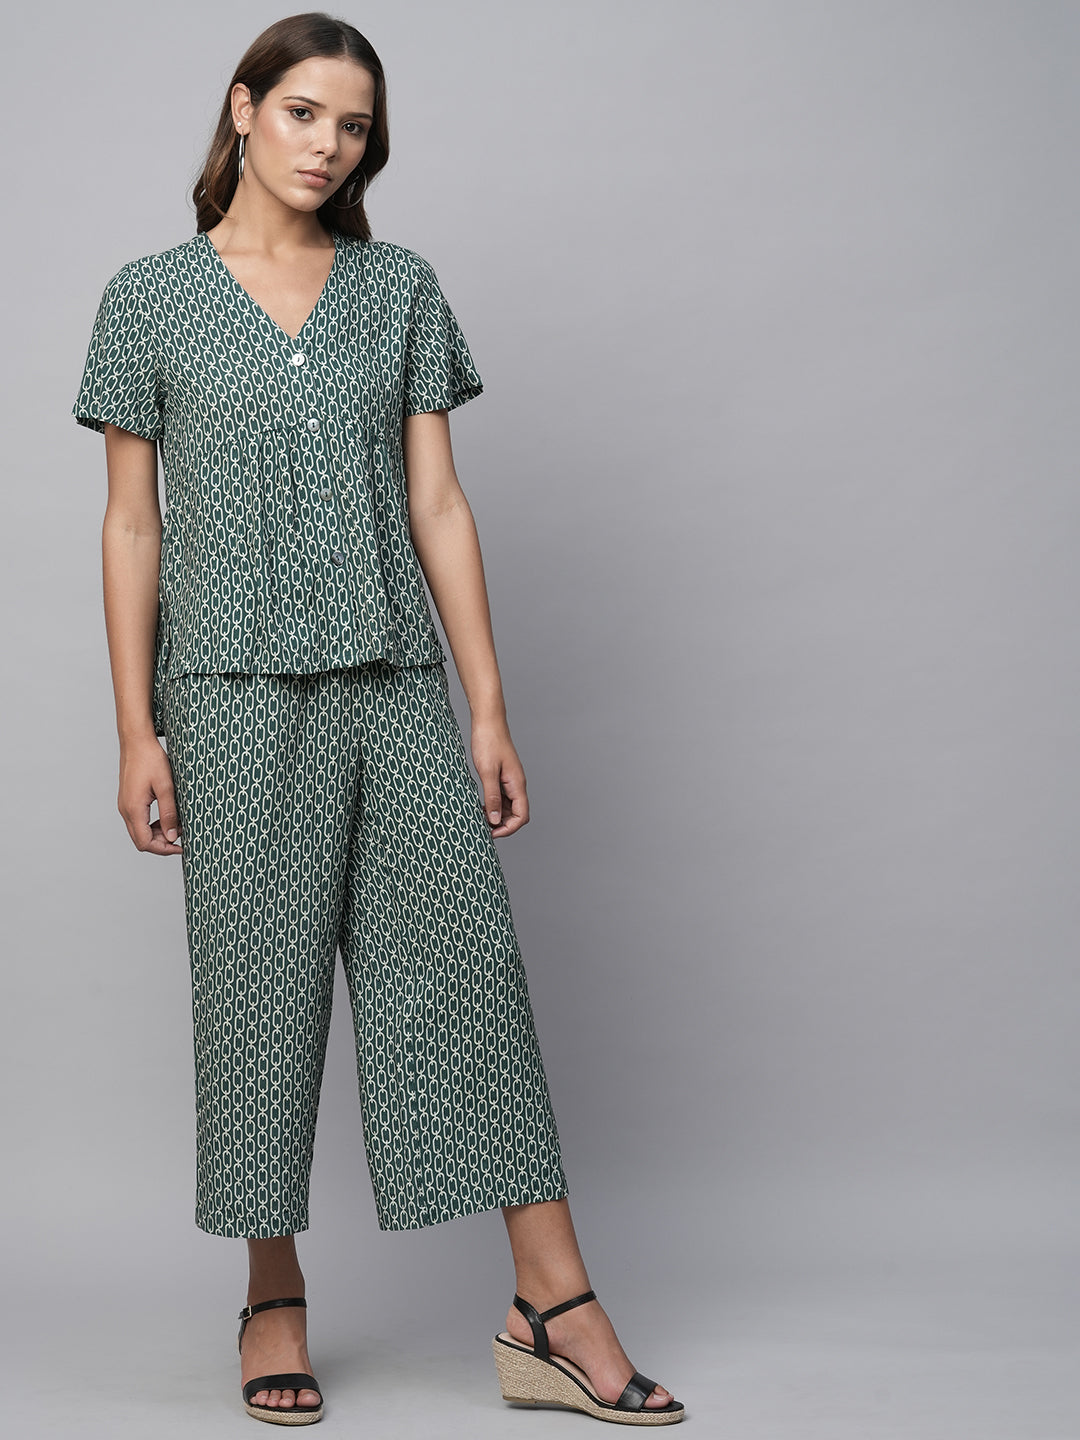 Printed Viscose Basque Swing Top With Pull On Wide Leg Cropped Pants